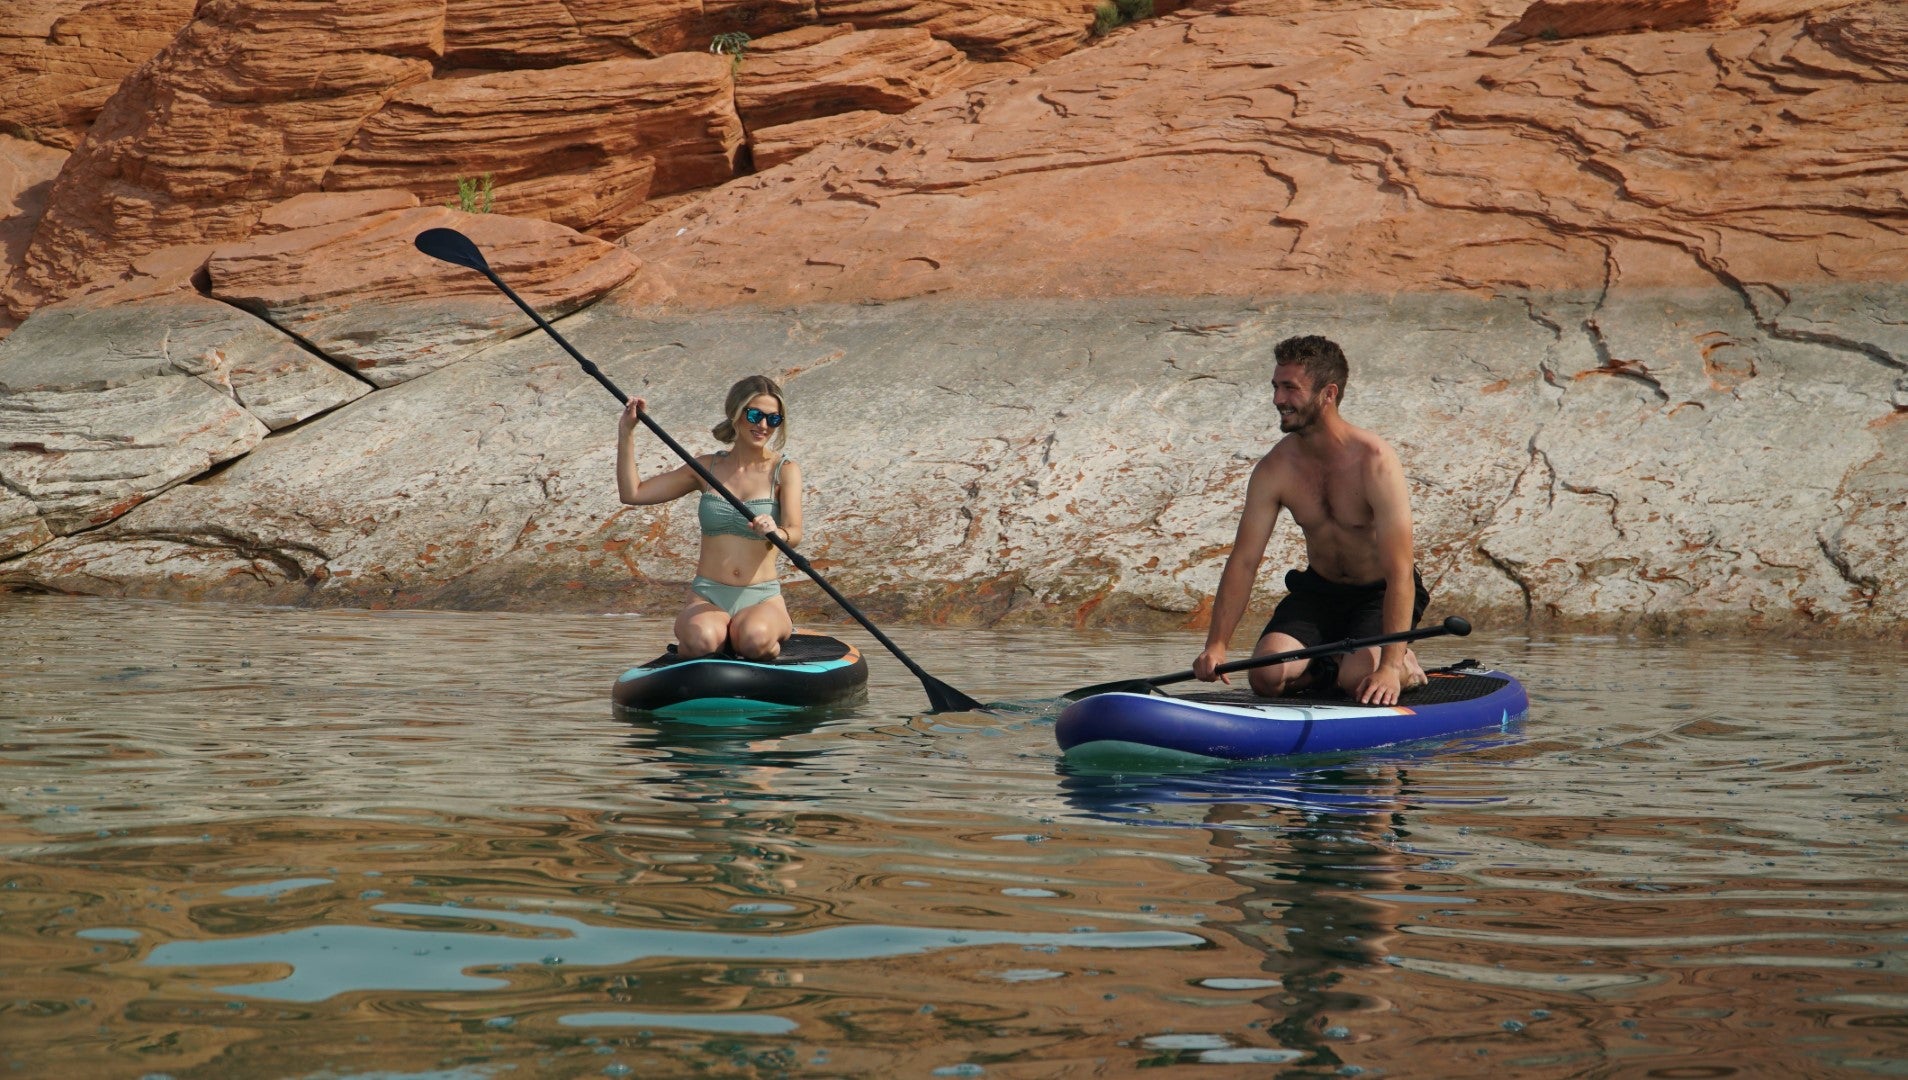 The 2SIDE Paddle allows you to sit-down, stand-up, paddle however you want. The 2SIDE Double-Sided Paddleboard Paddle is a radically innovative SUP Paddle for paddleboards looking to explore the water faster and easier